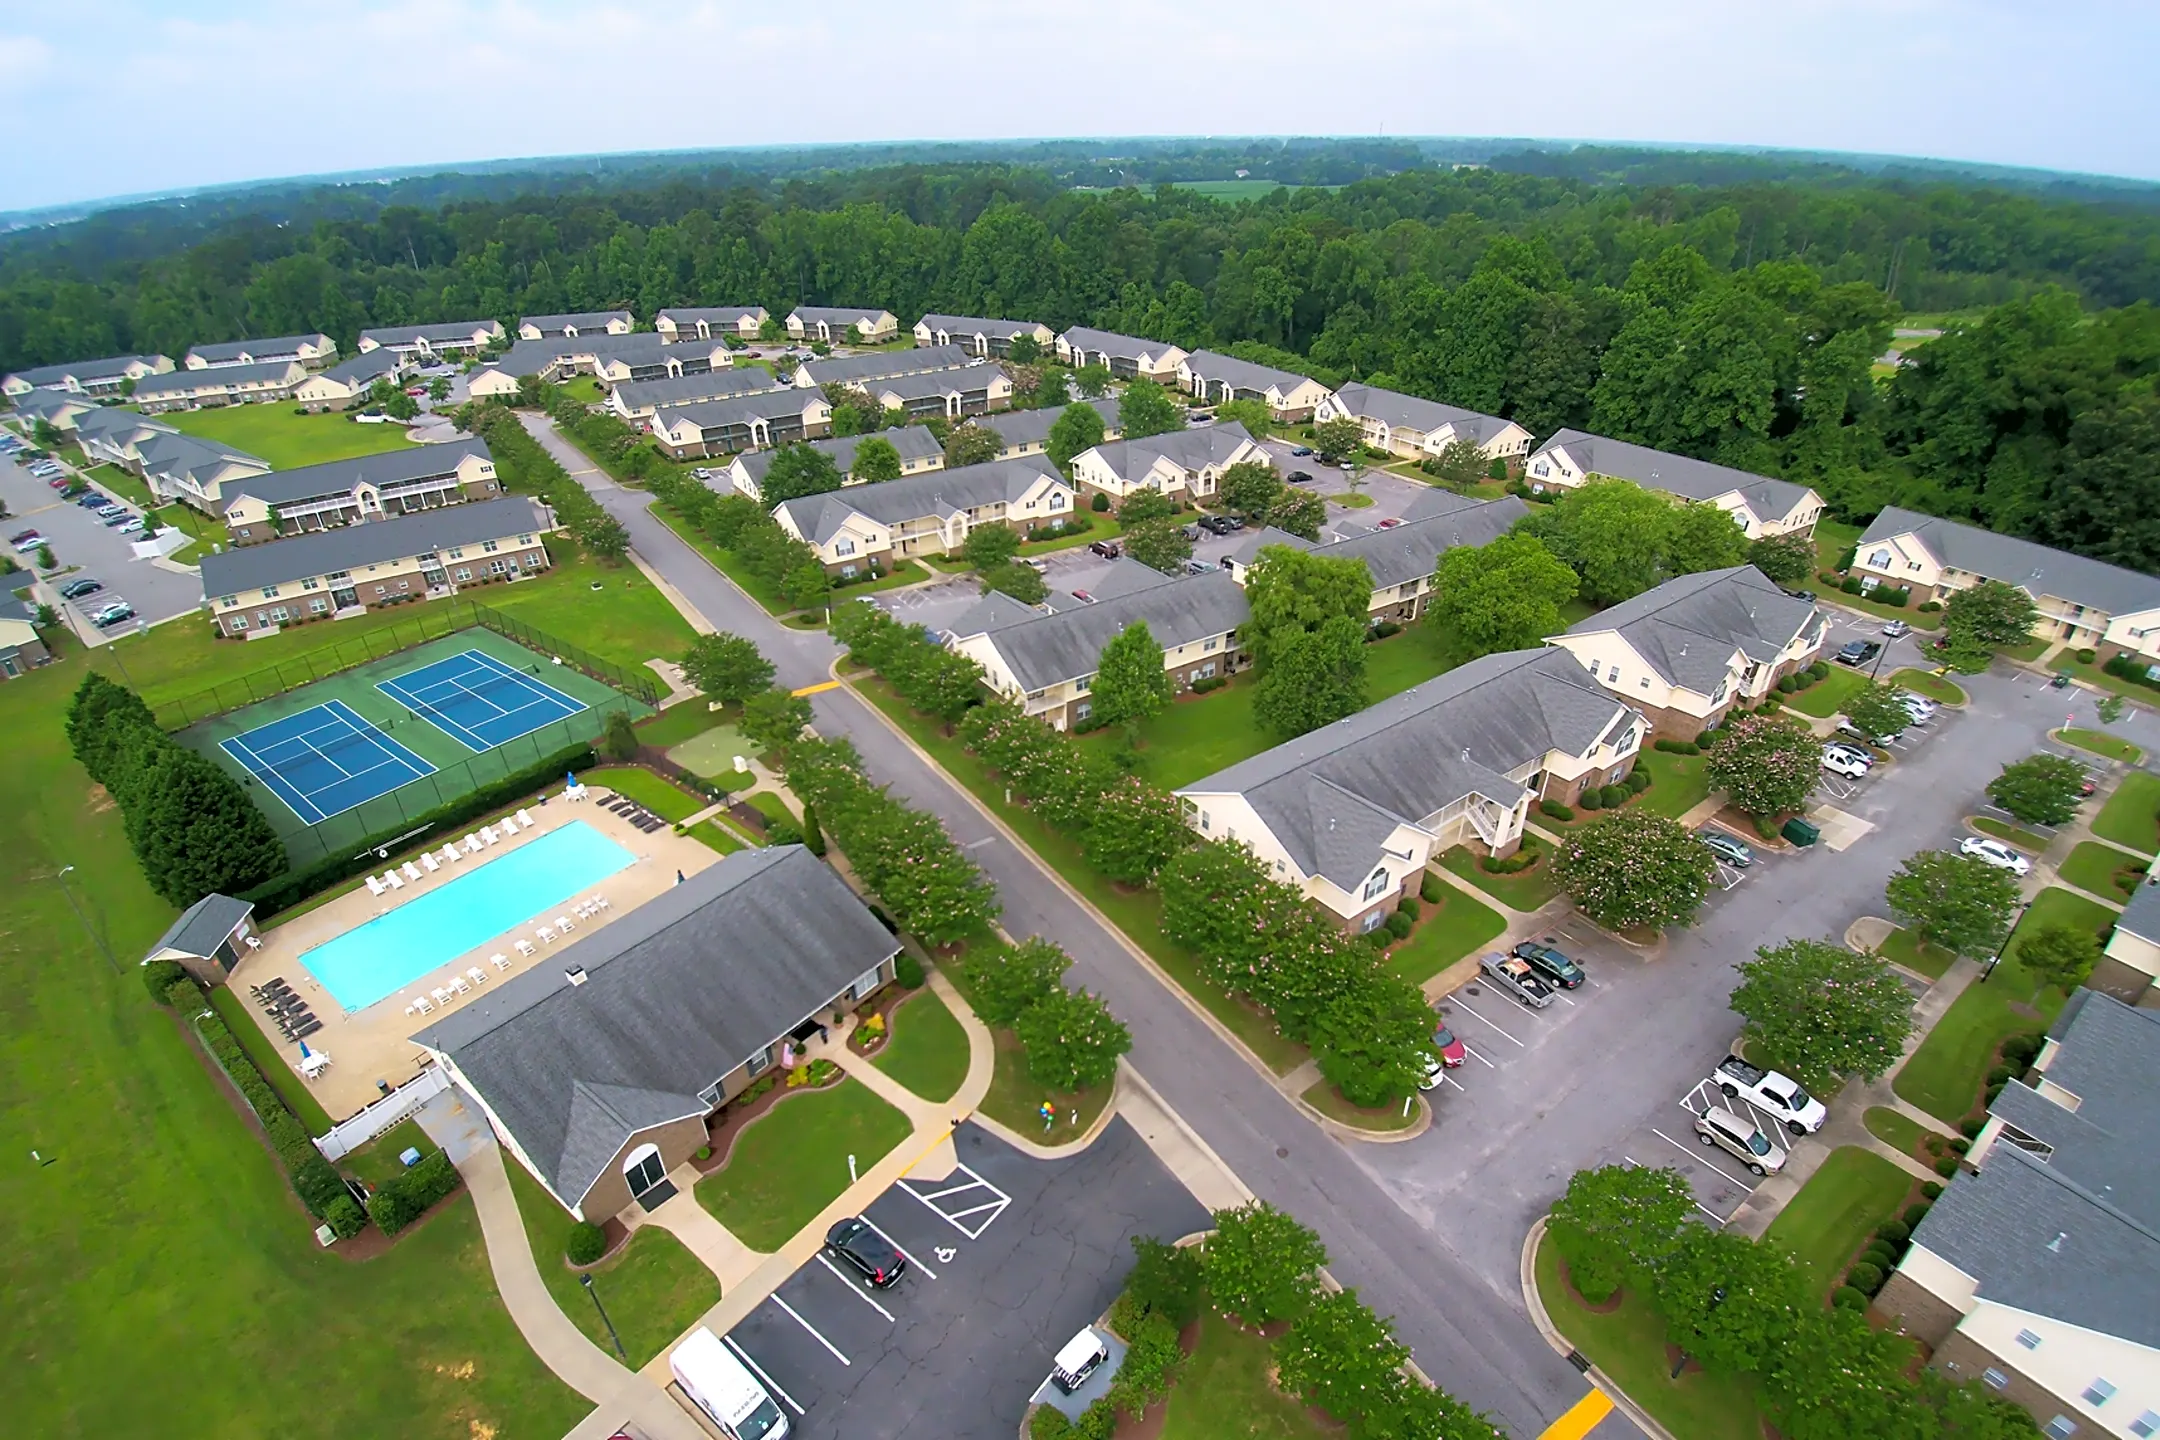 View - Meridian Park Apartments - Greenville, NC